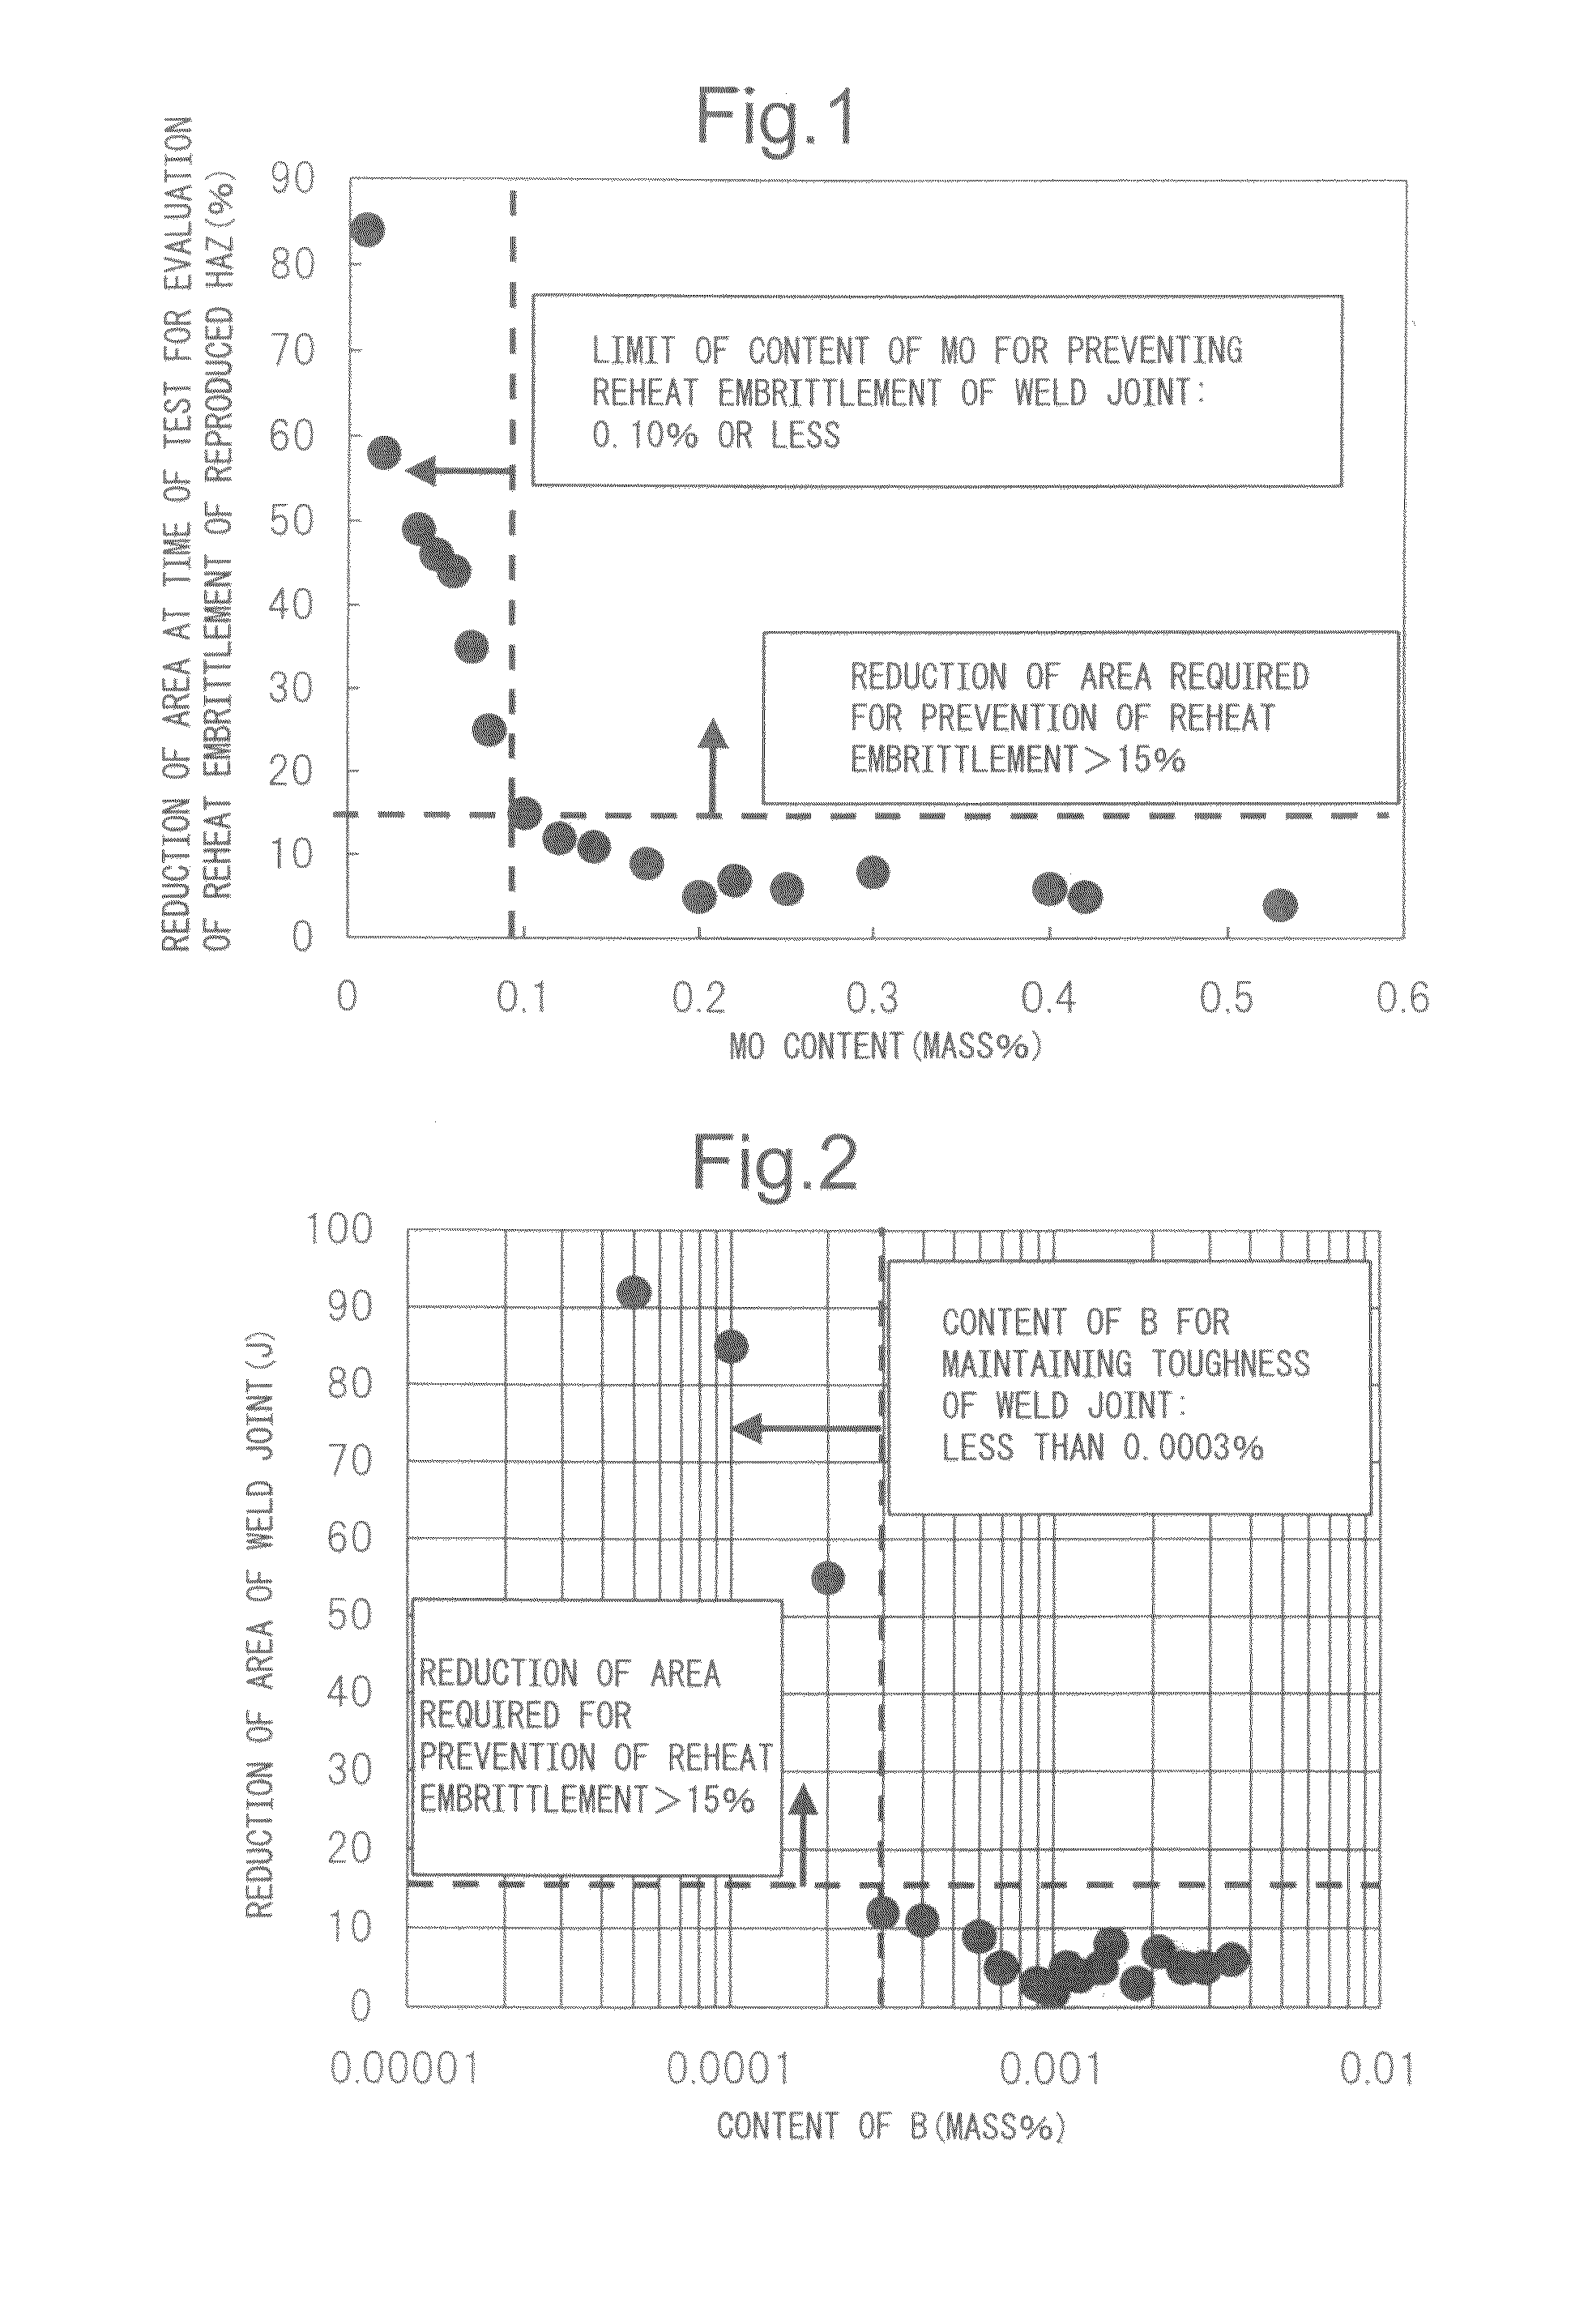 Fire-resistant steel superior in weld joint reheat embrittlement resistance and toughness and method of production of same